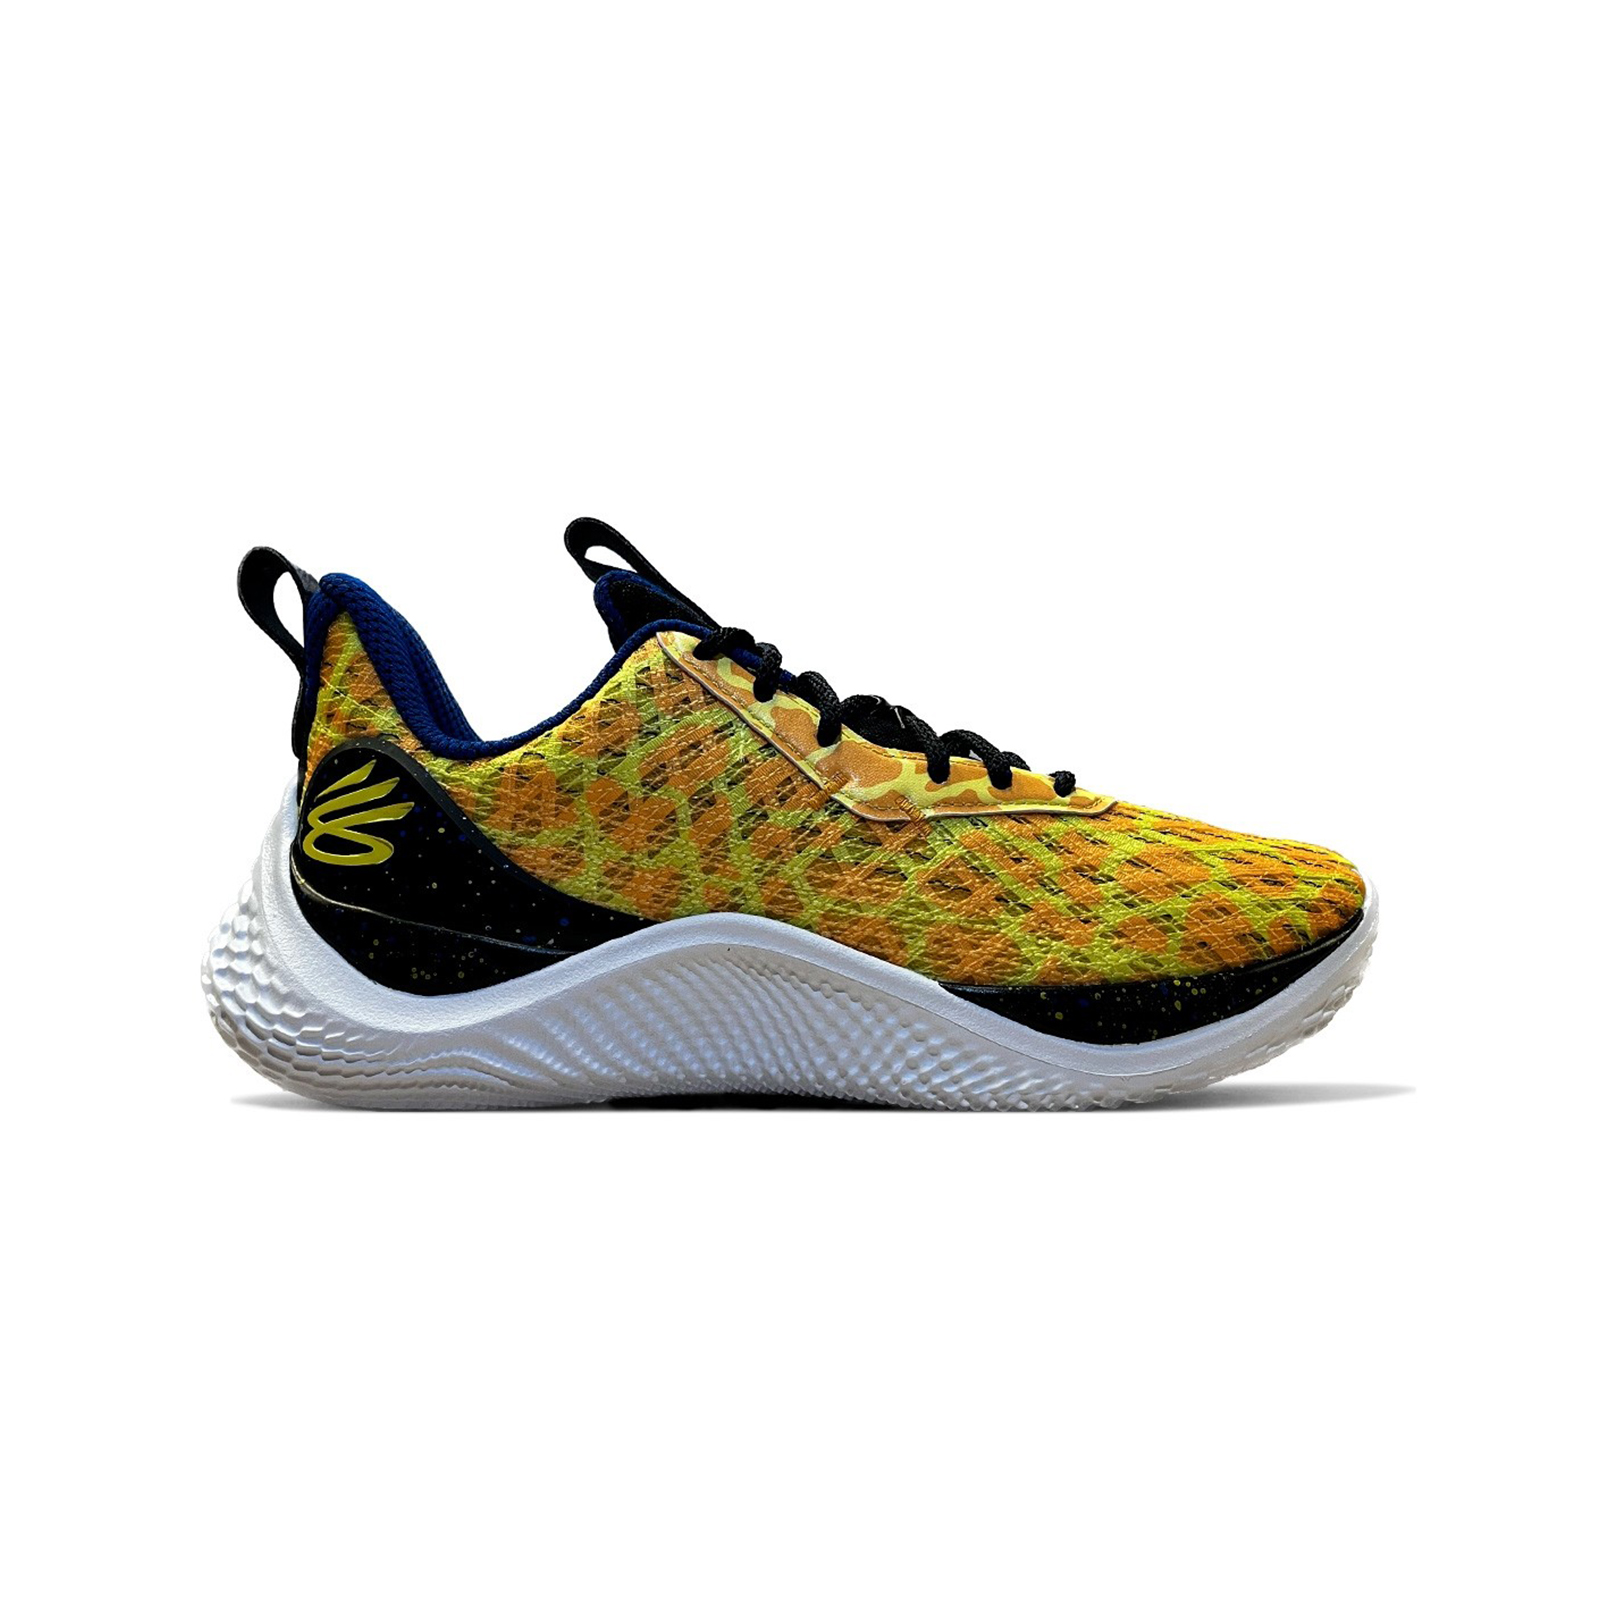 Under Armour - 3026272 CURRY 10 BANG BANG - 700/5271 Ανδρικά > Παπούτσια > Αθλητικά > Παπούτσι Low Cut